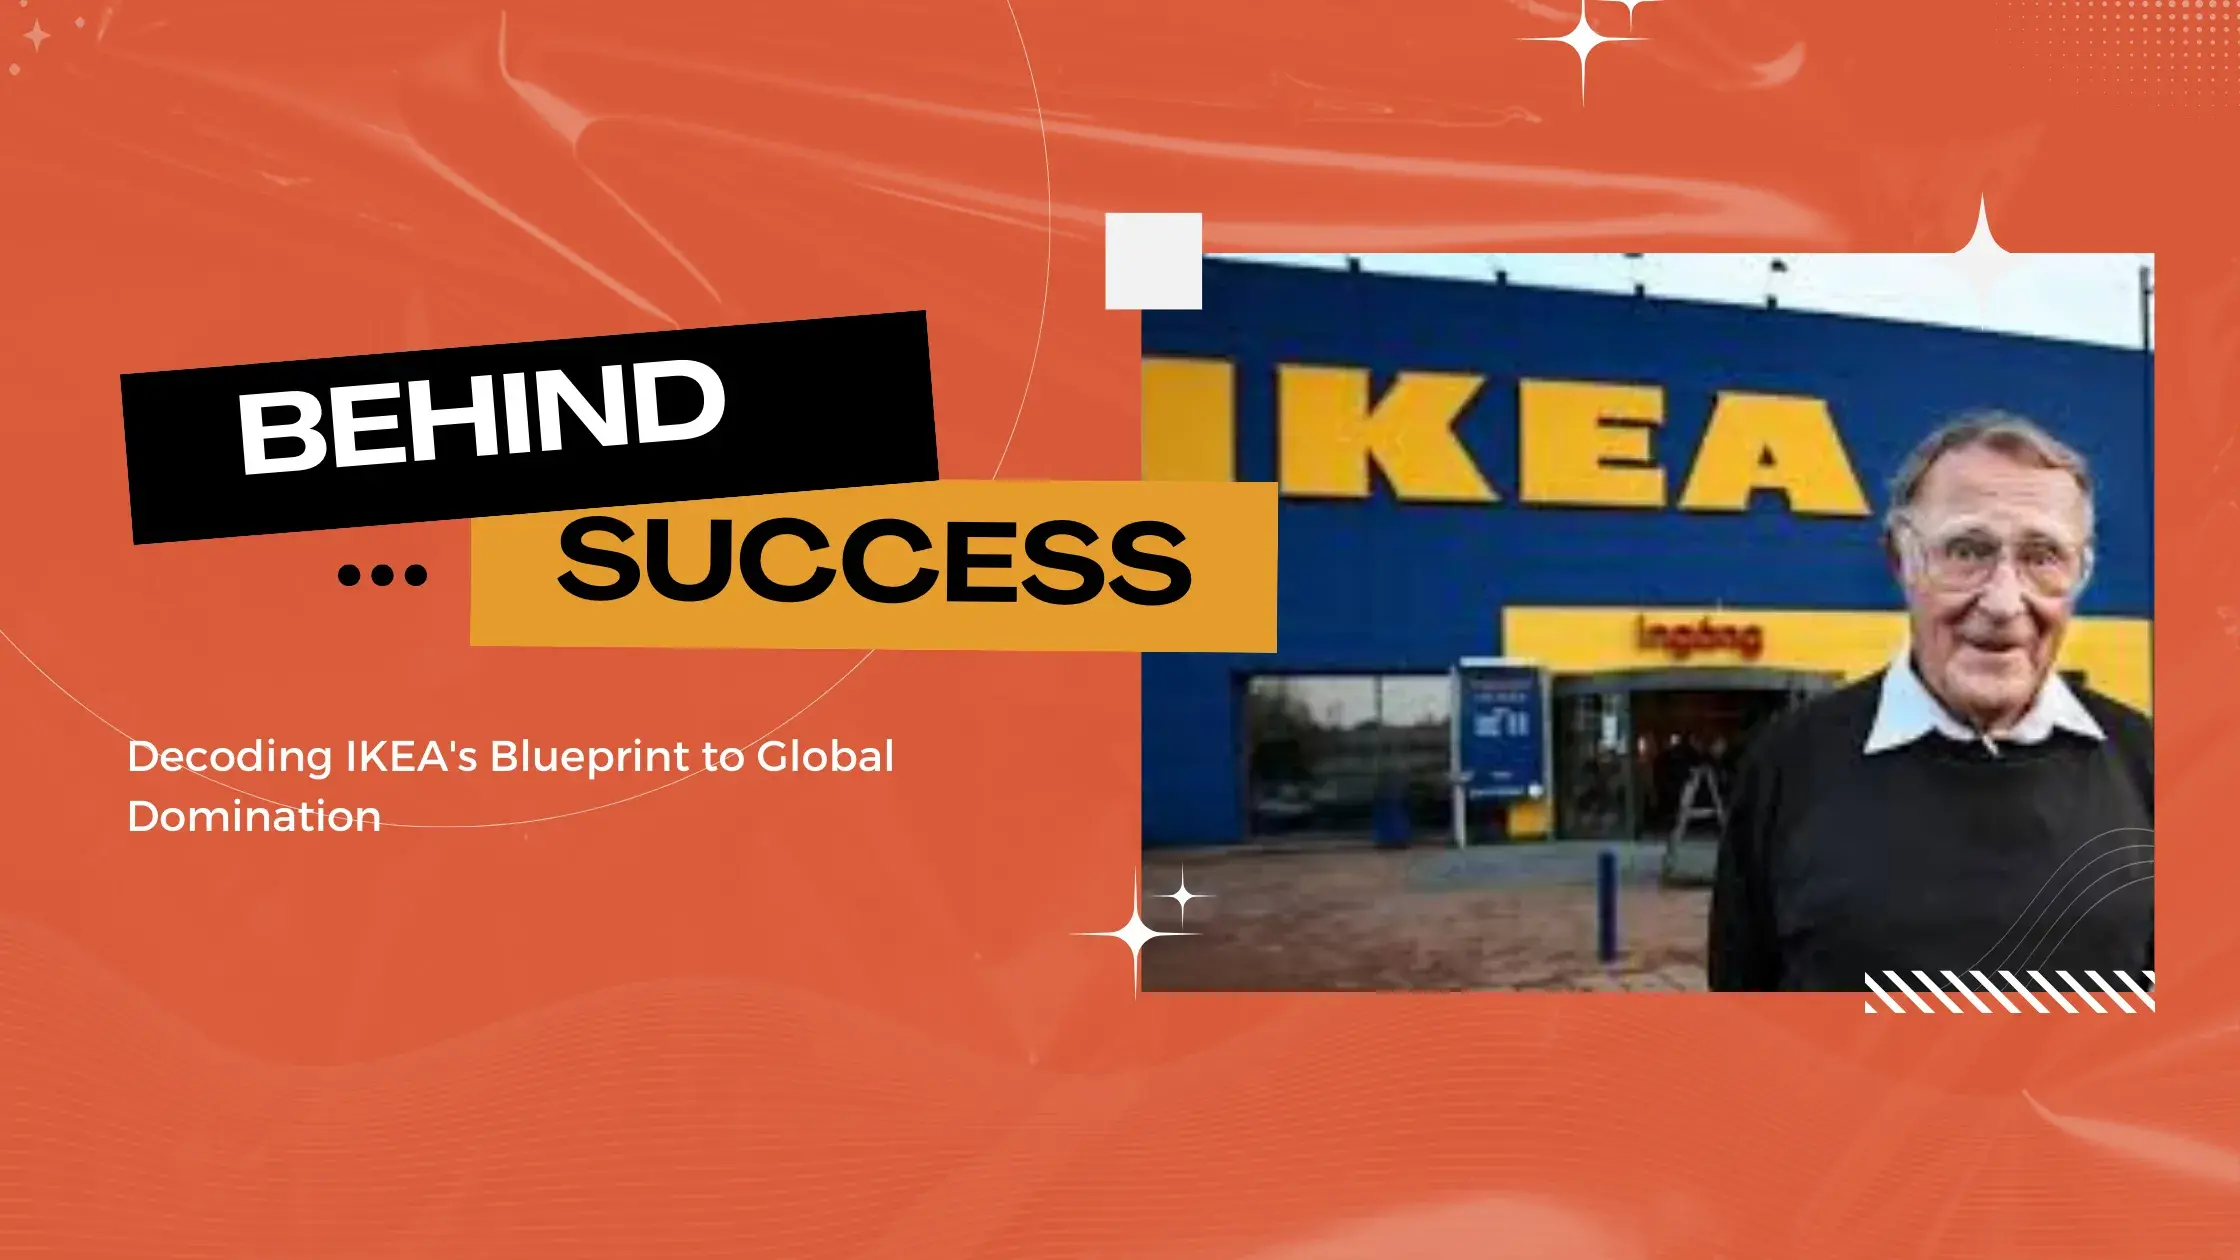 Behind the Success: Decoding IKEA's Blueprint to Global Domination